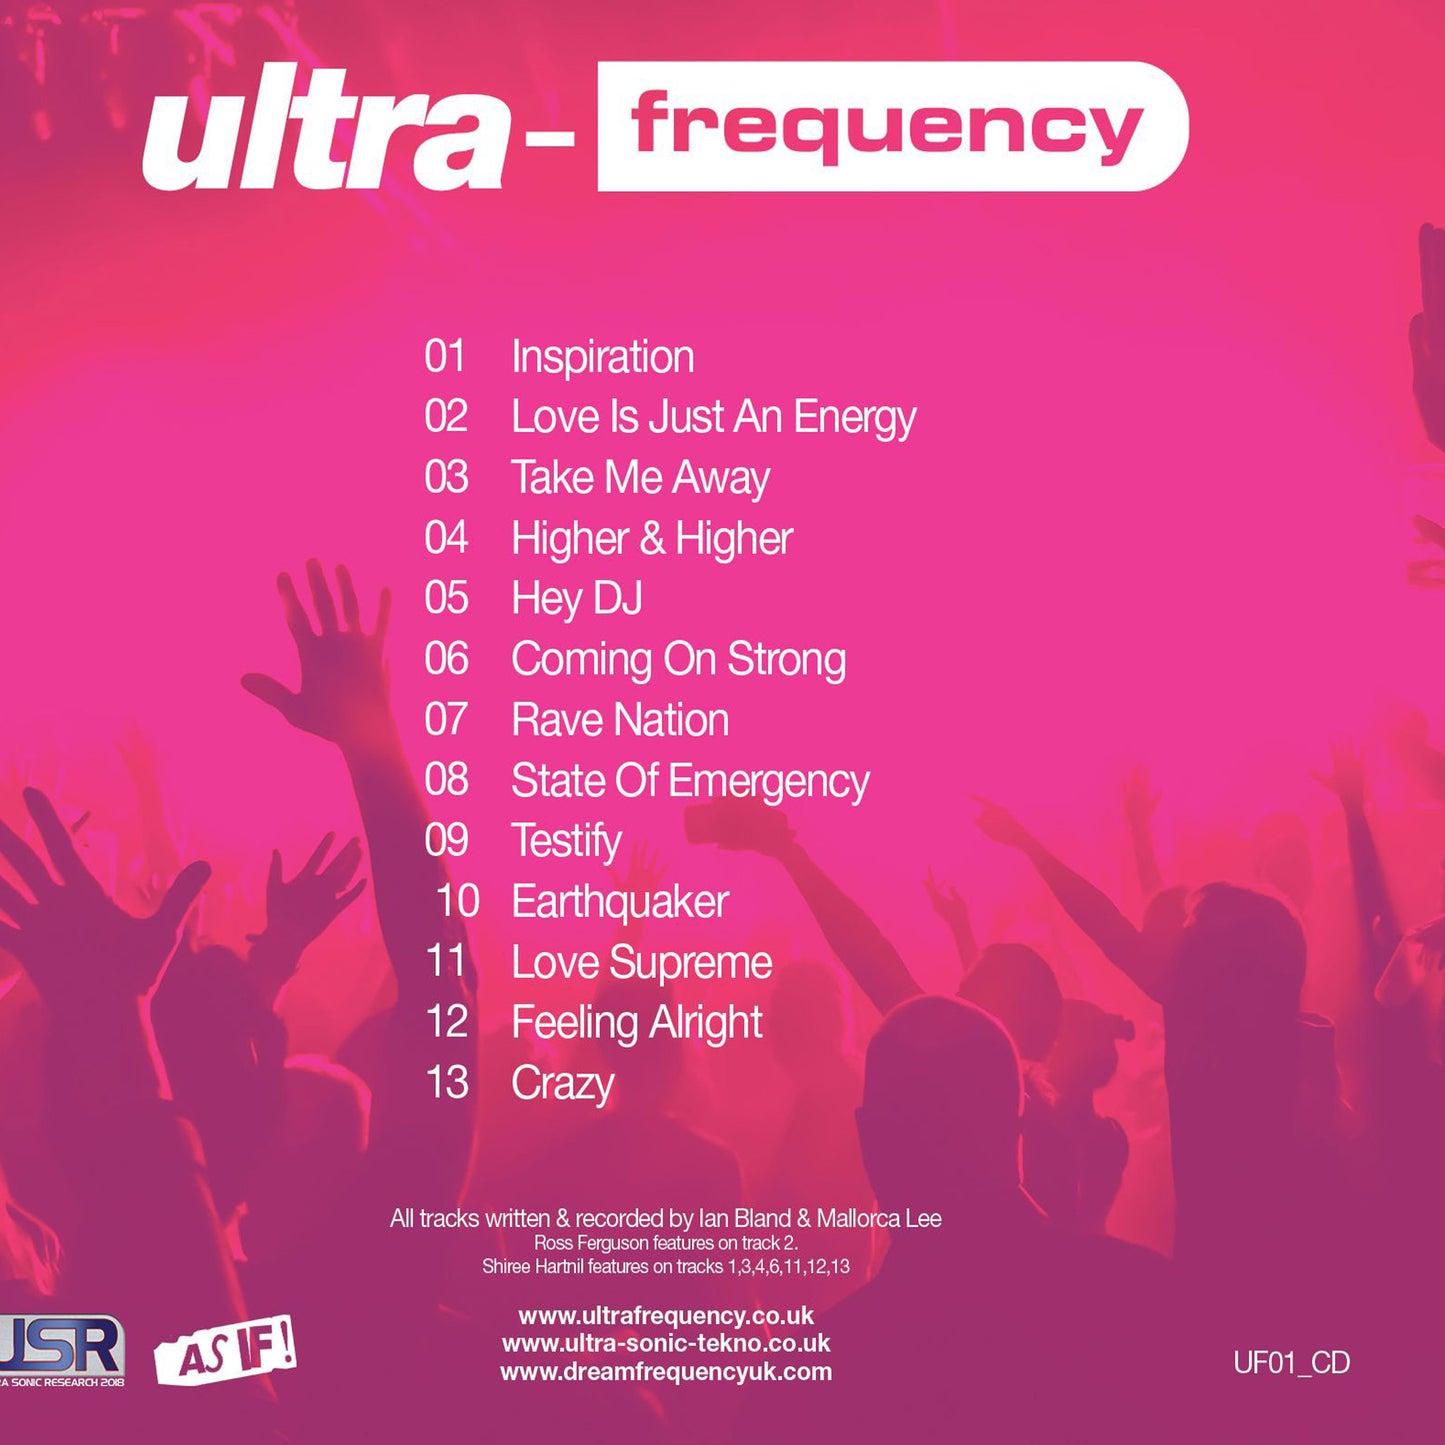 Limited Edition Ultra-Frequency CD